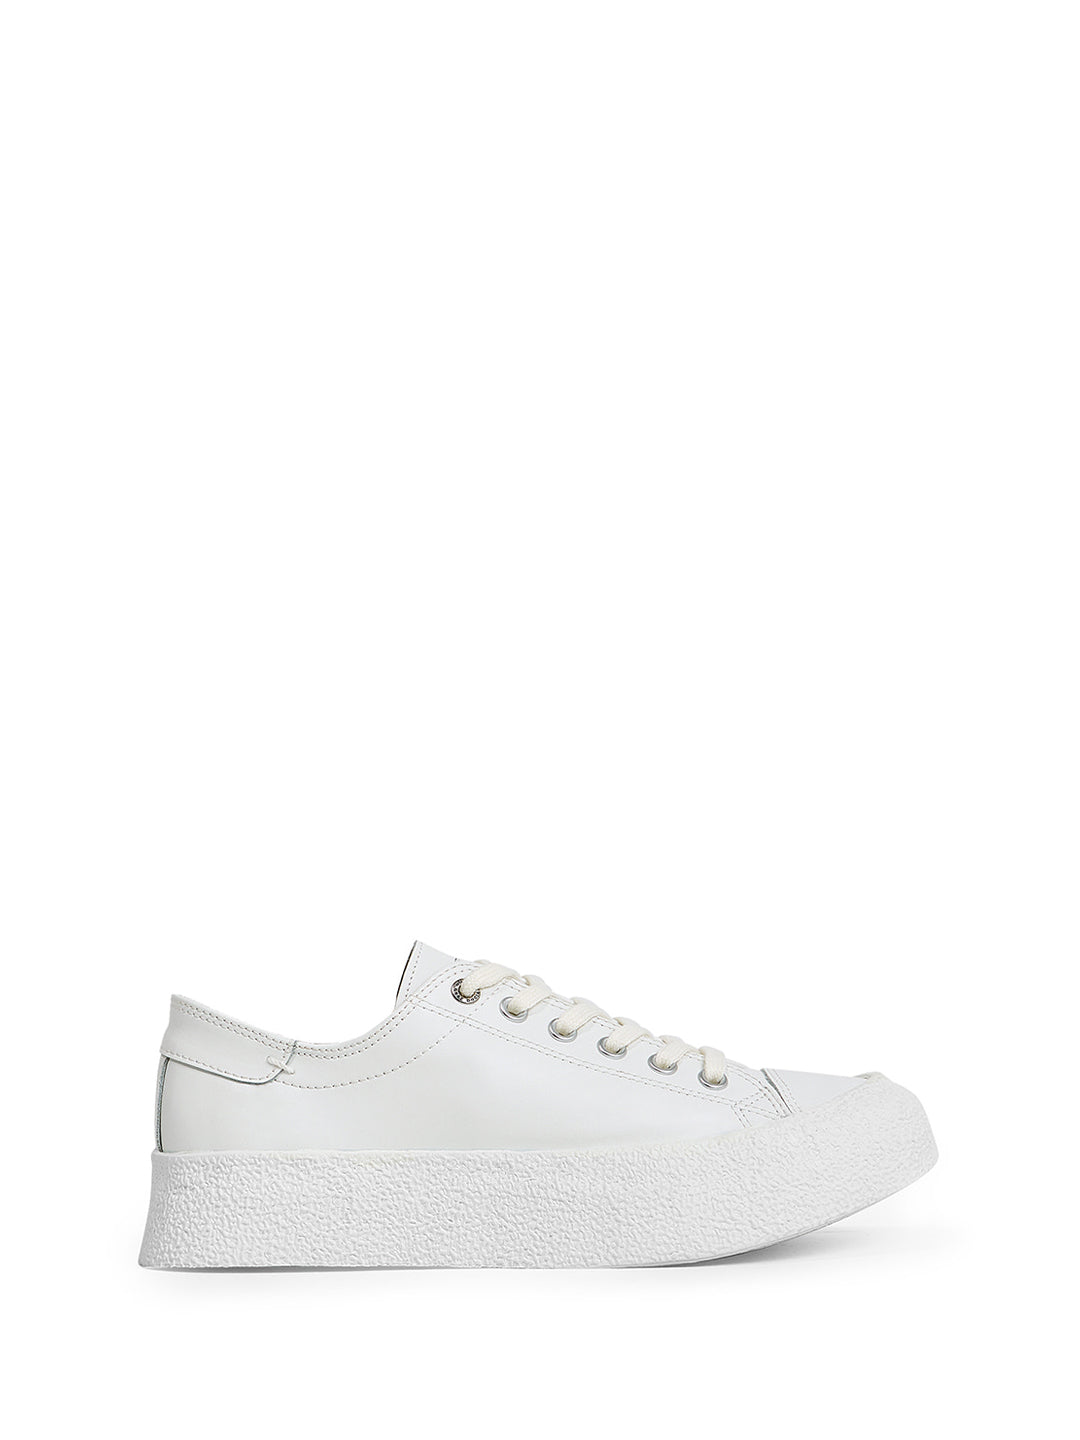 EPT Dive Leather white sneakers